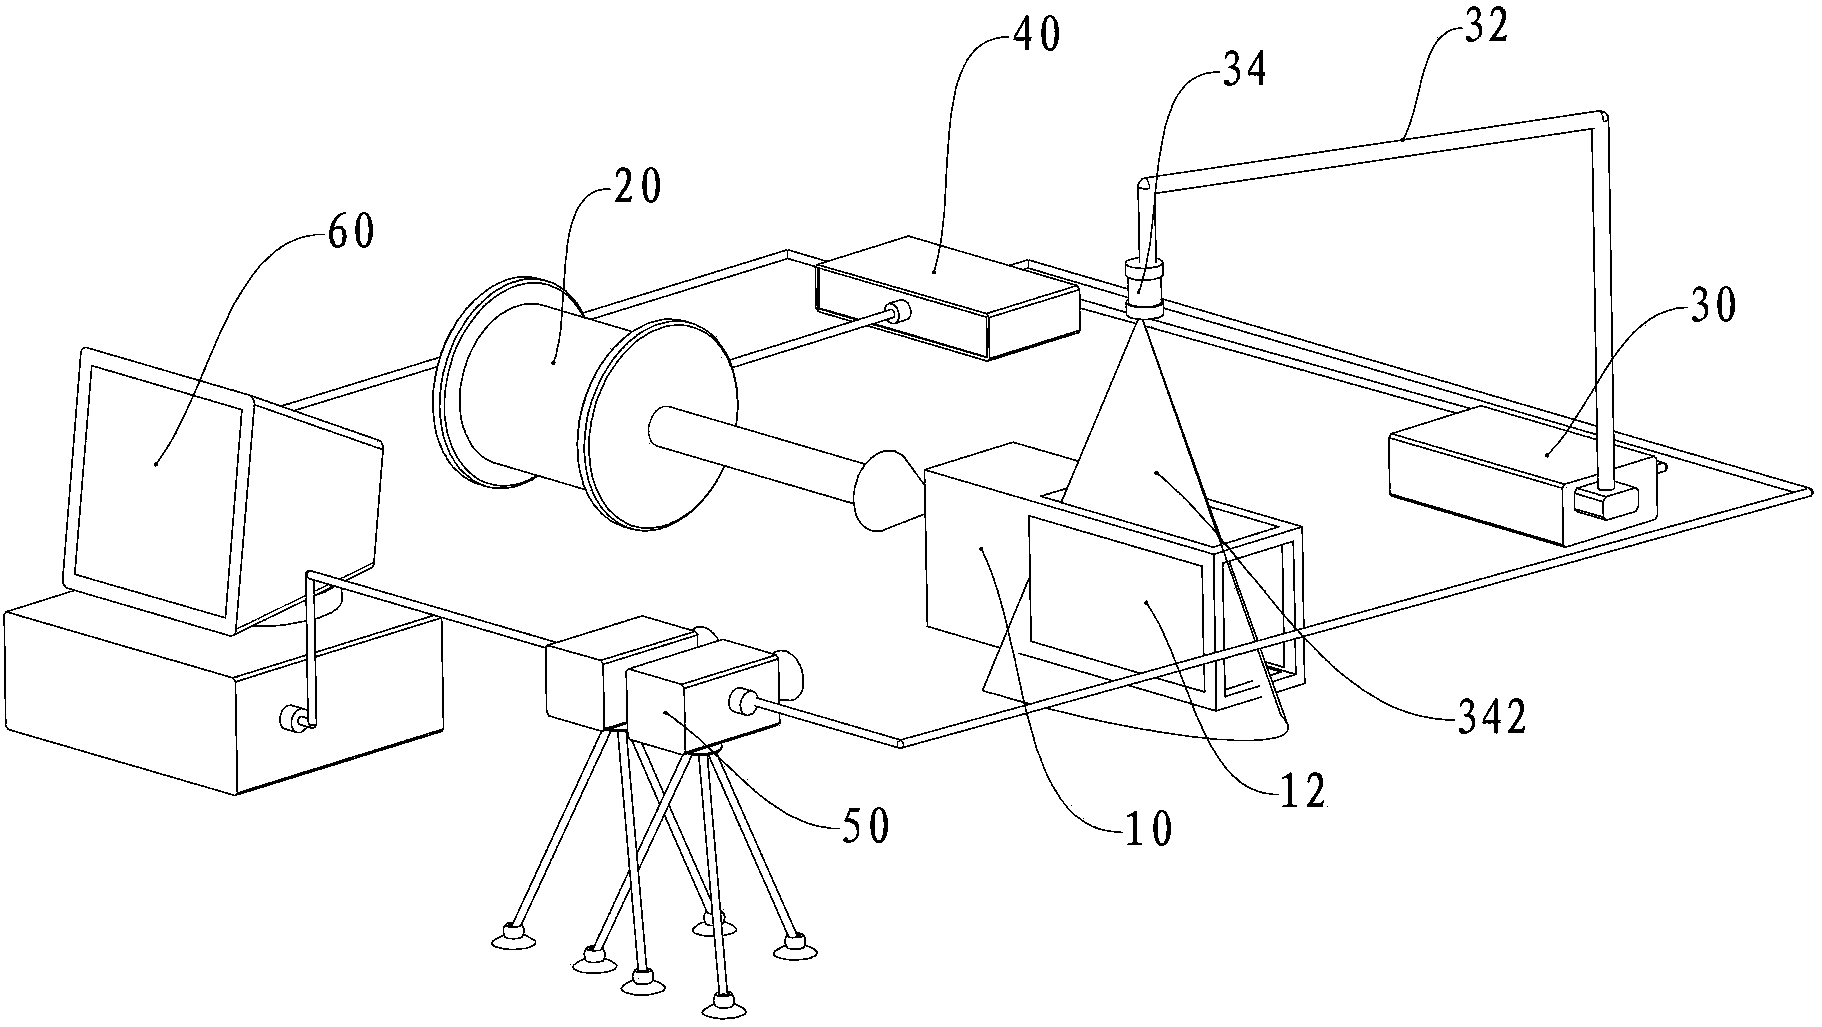 Display system and display method for NPLS (nano-tracer planar laser scattering) three-dimensional structure of supersonic flow field